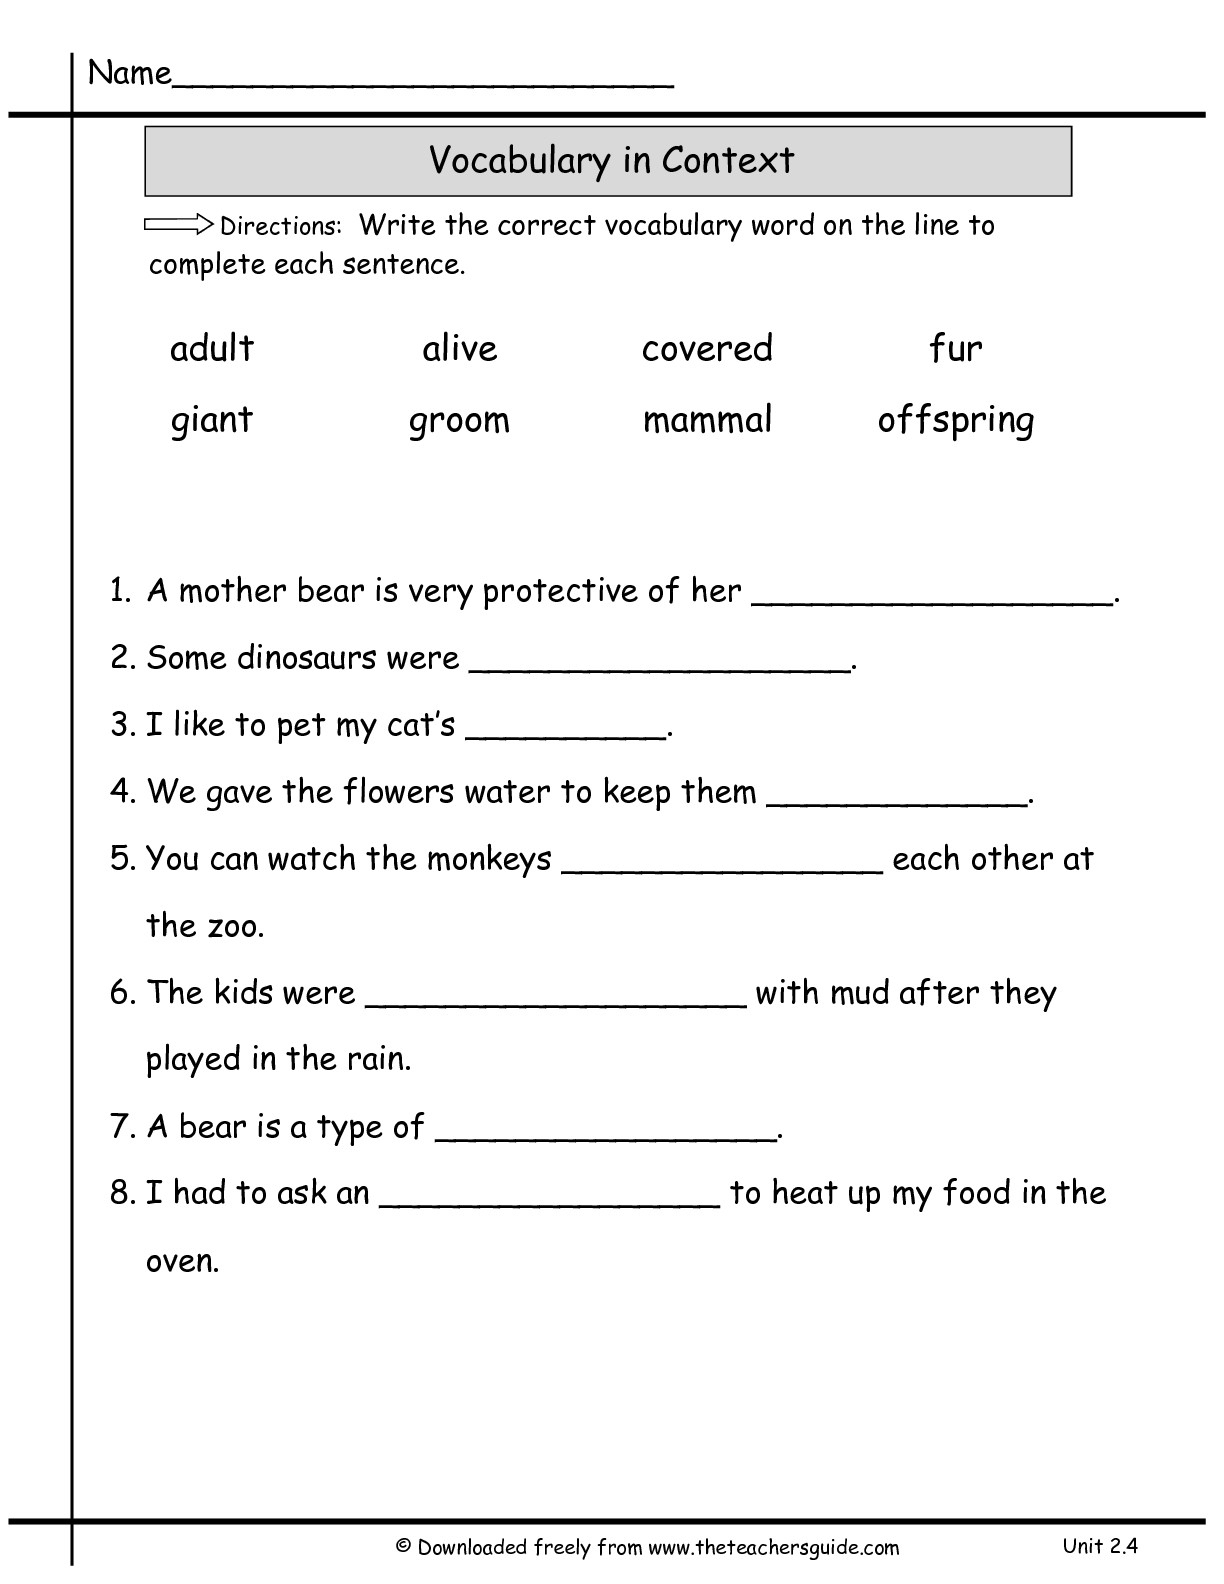 Free Second Grade Science Worksheets For Learning - Math Worksheet - Free Printable Science Worksheets For 2Nd Grade